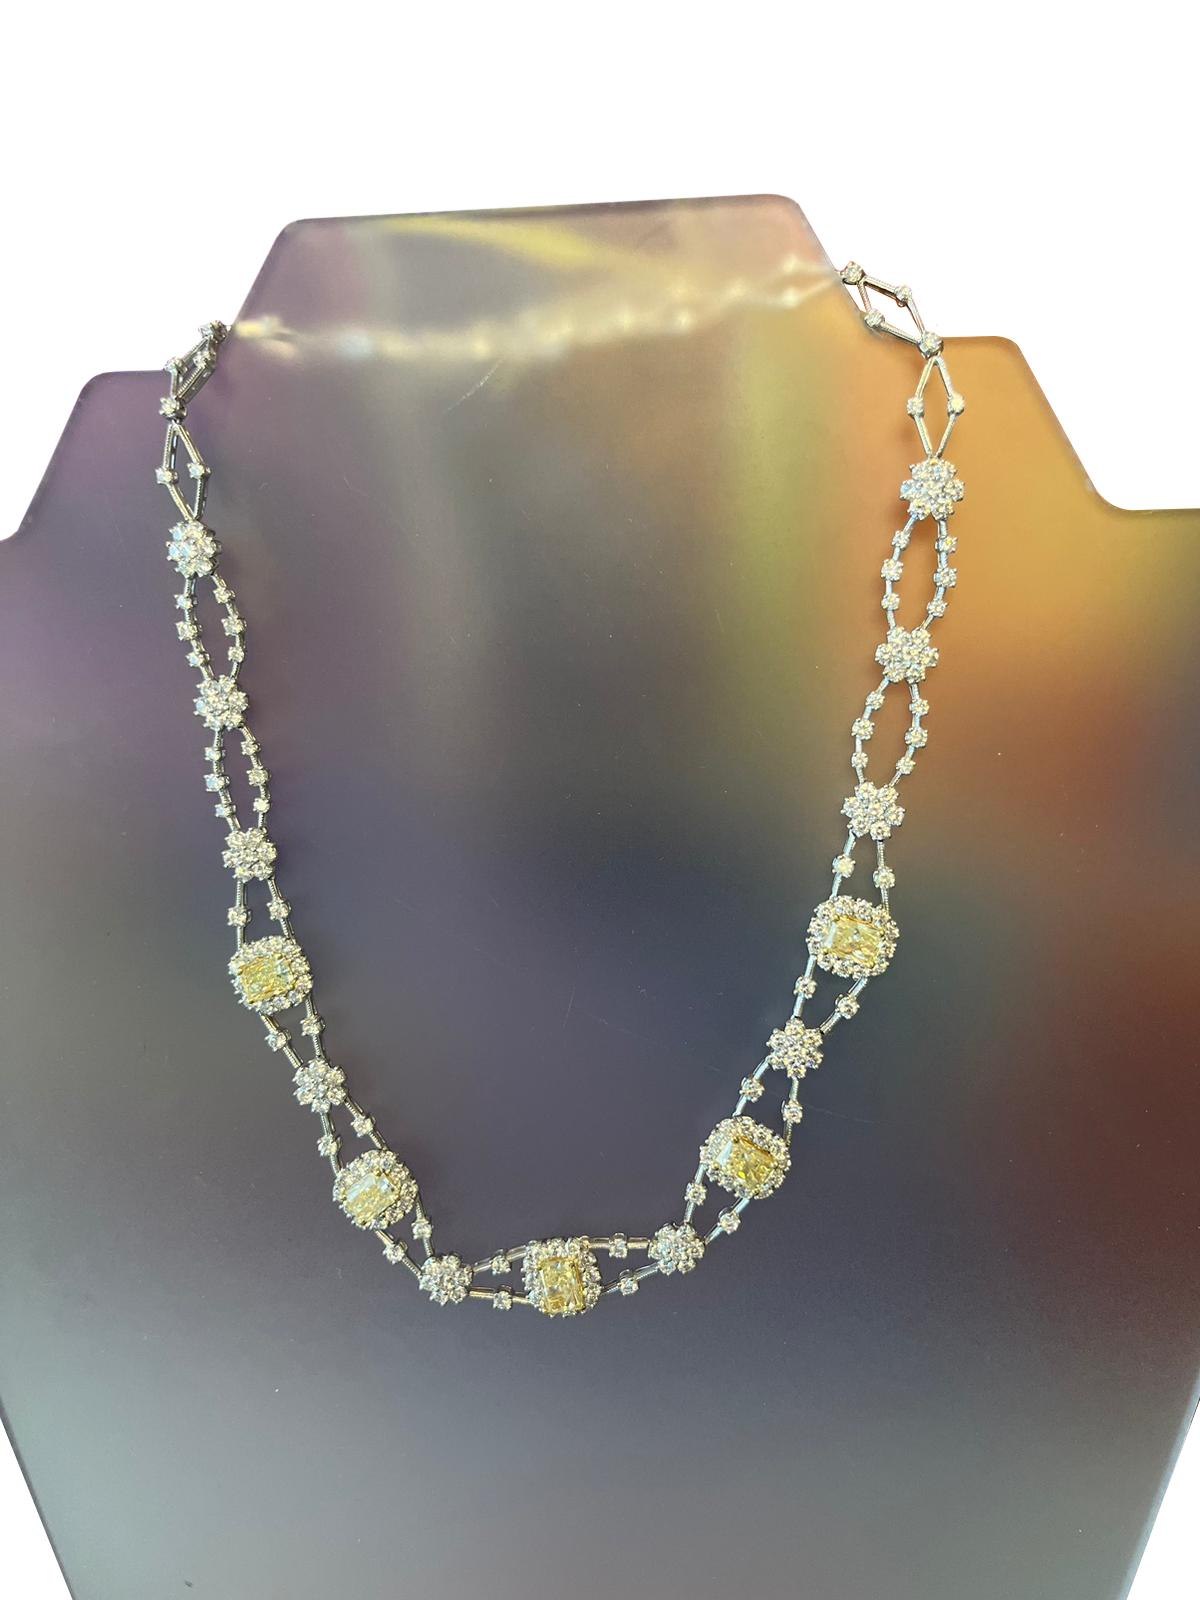 Modernist 11.8ctw Natural Radiant Cut Yellow Fancy Color 5.80ct White Diamonds Necklace For Sale